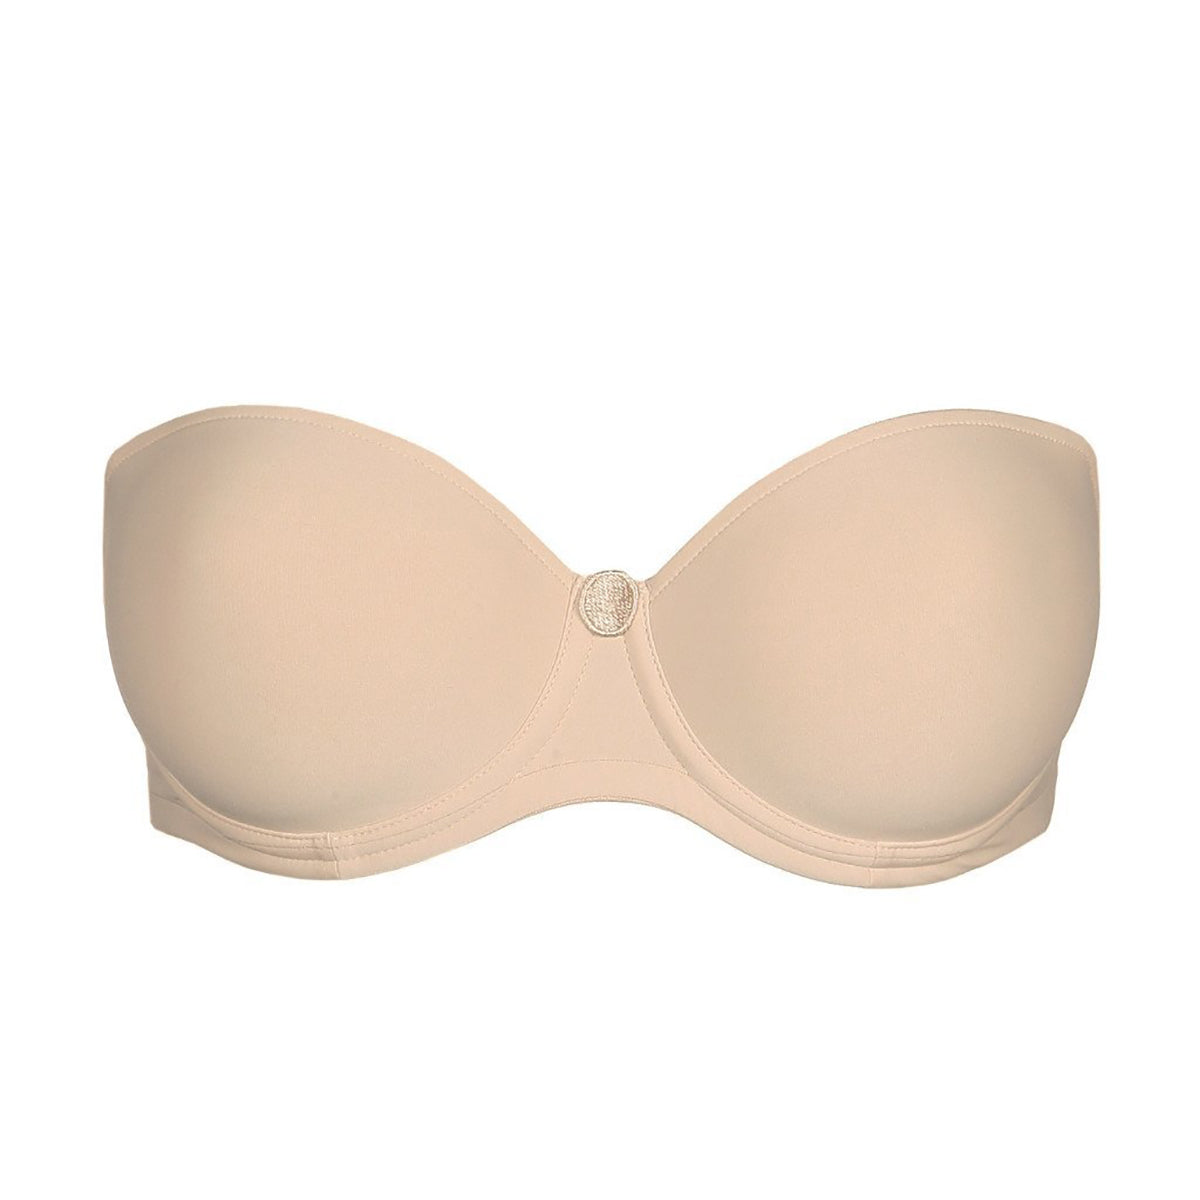 Lily Of France Gel Touch Push Up Strapless Bra 2111121 - Bramania